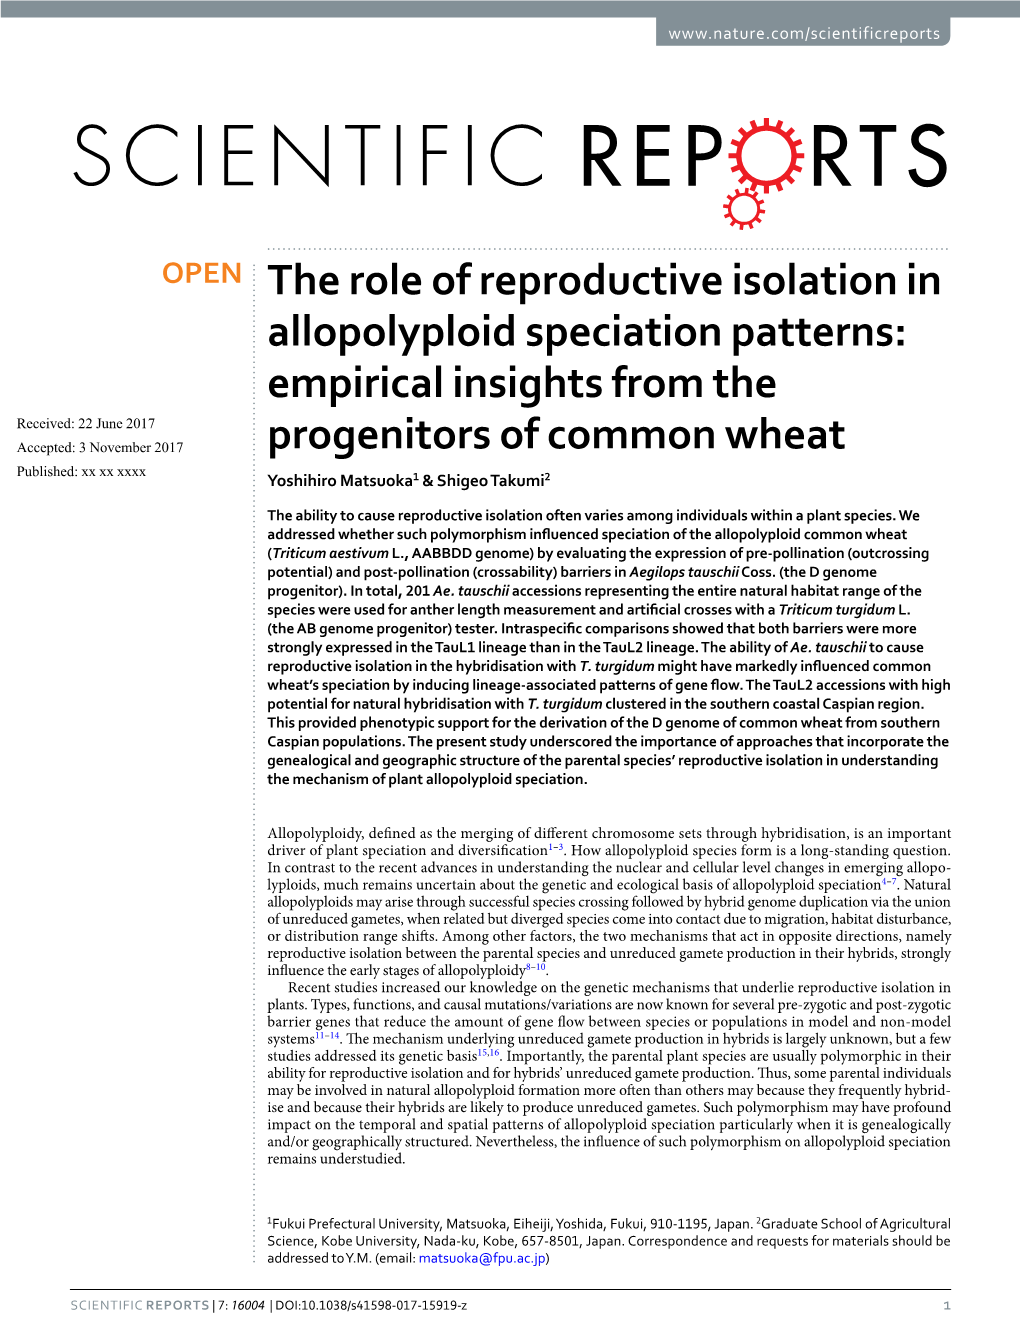 The Role of Reproductive Isolation in Allopolyploid Speciation Patterns